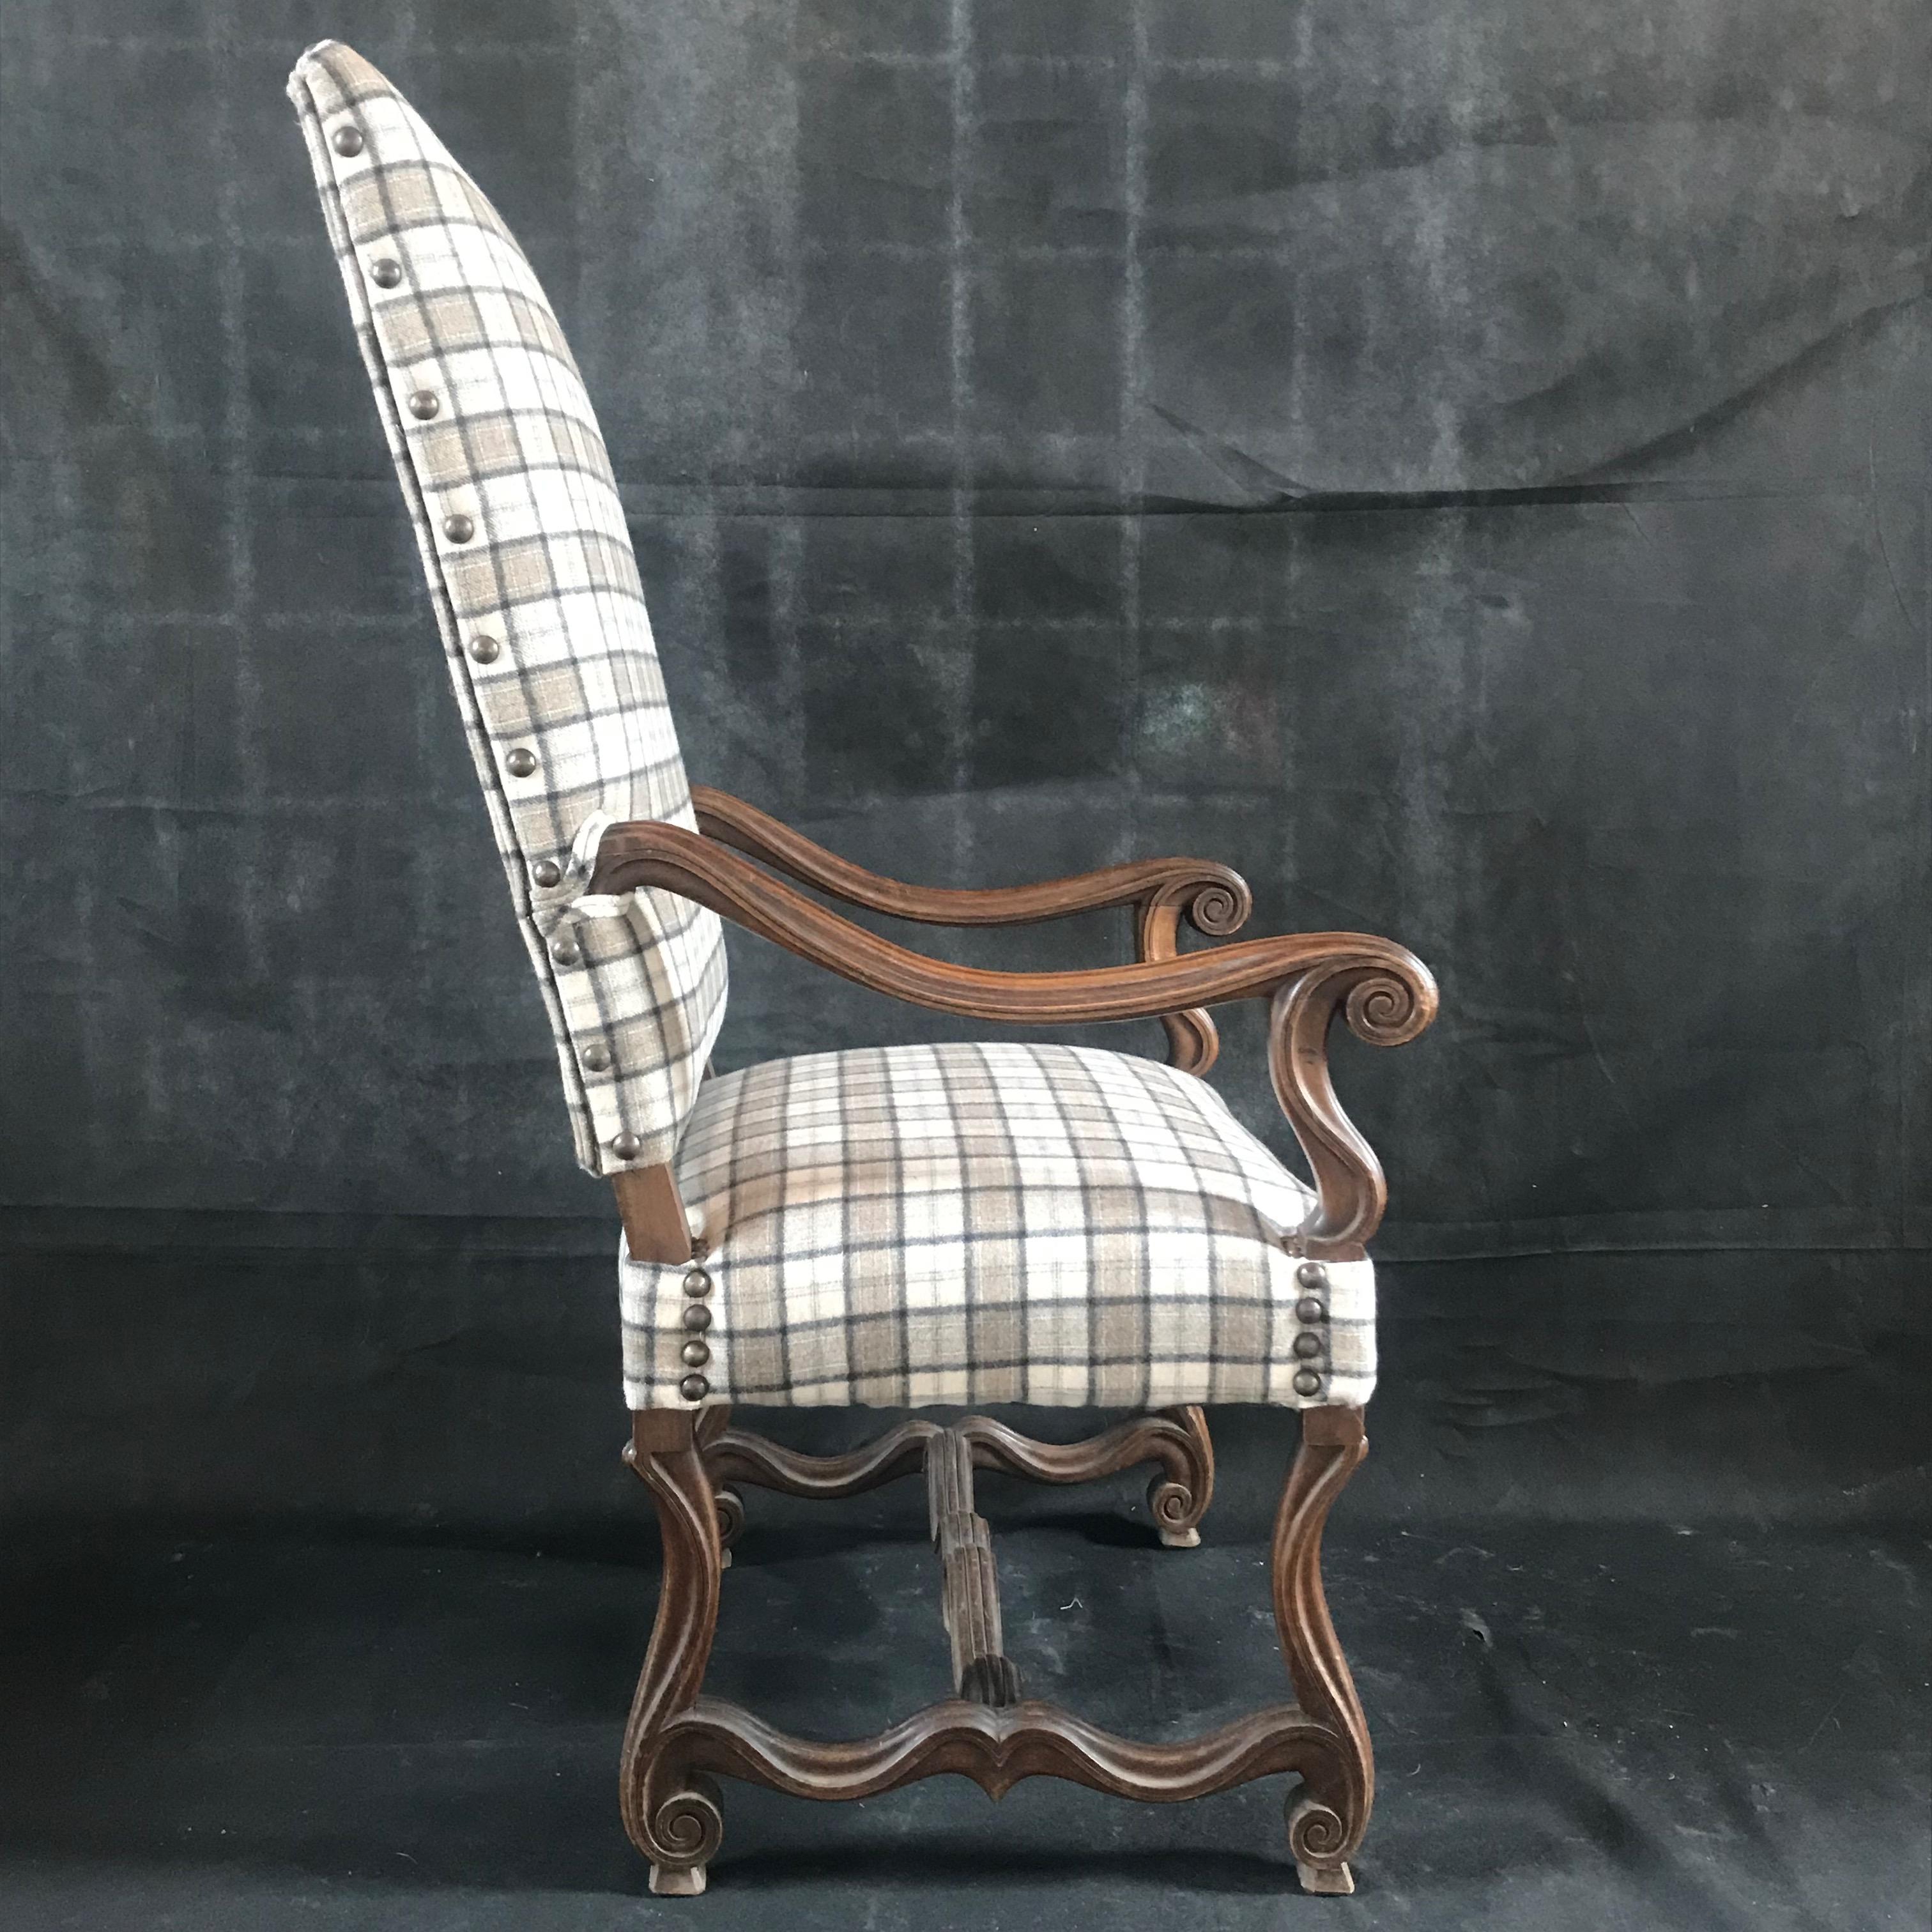 Stunning Louis XV throne like armchair having very handsome carved walnut arms and base with curlicues at the ends and a gorgeous fleur di lis-eque stretcher underneath. Newly updated with black, white and grey Tartan upholstery.